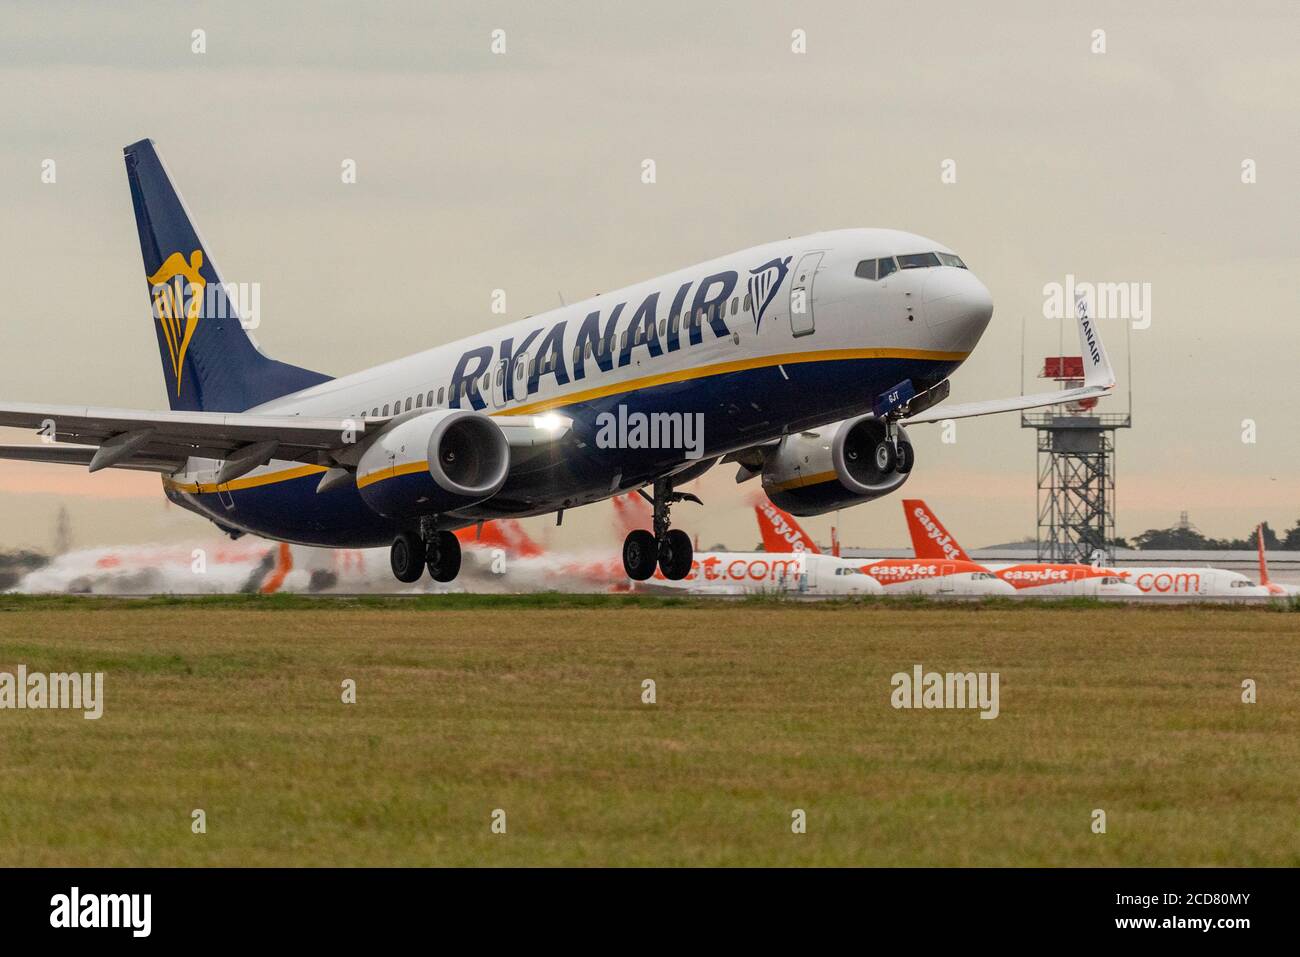 Ryanair Boeing 737 jet airliner plane taking off for Bilbao, Spain, over stored easyJet planes grounded due to COVID-19 at London Southend Airport Stock Photo